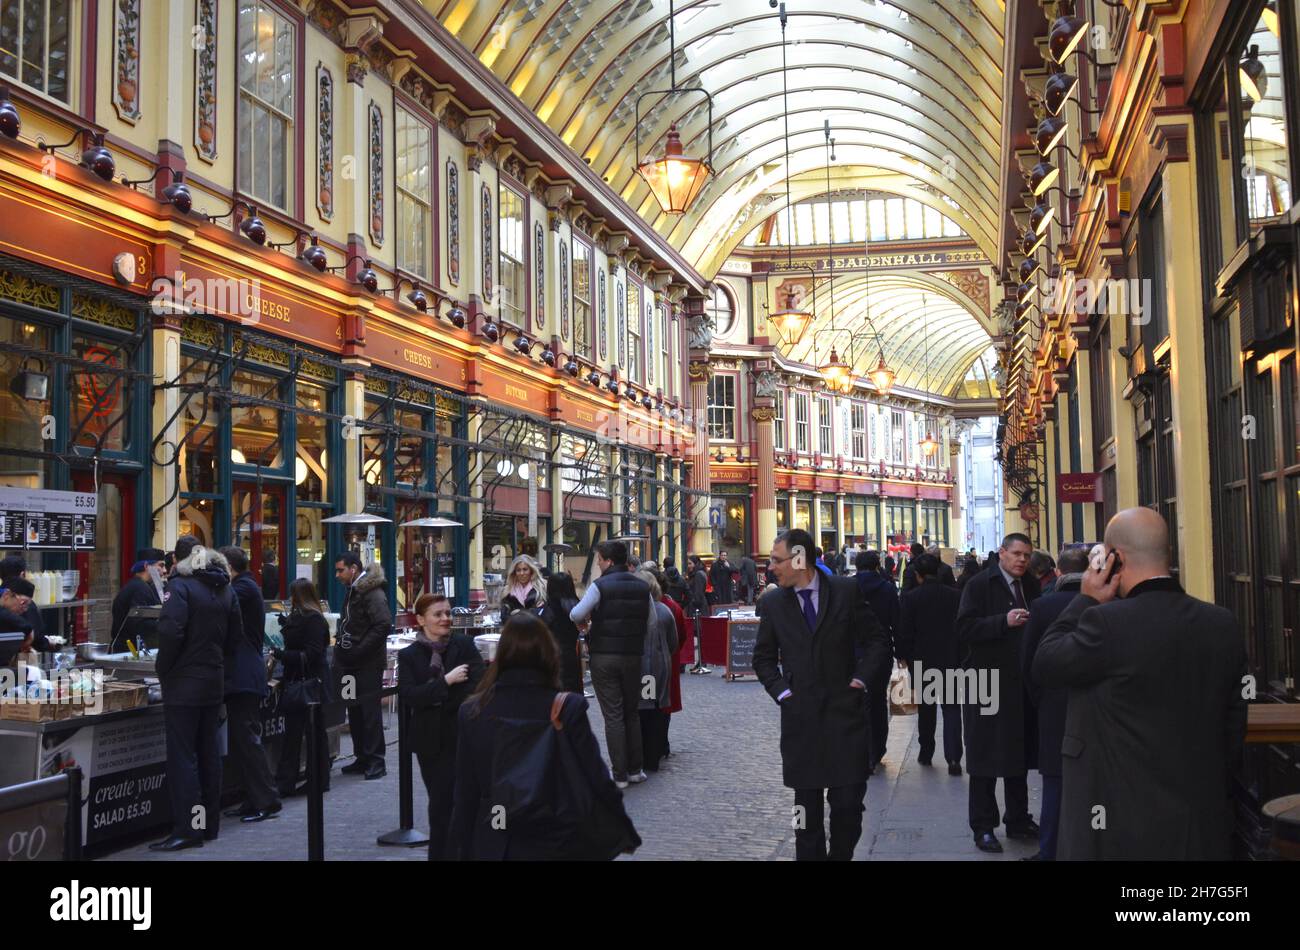 UNITED KINGDOM. ENGLAND. LONDON. THE CITY. THE LEADEN HALL MARKET WAS BUILT IN 1881 BY SIR HORACE JONES. THIS MARKET IS FULL OF PUBS AND RESTAURANTS W Stock Photo